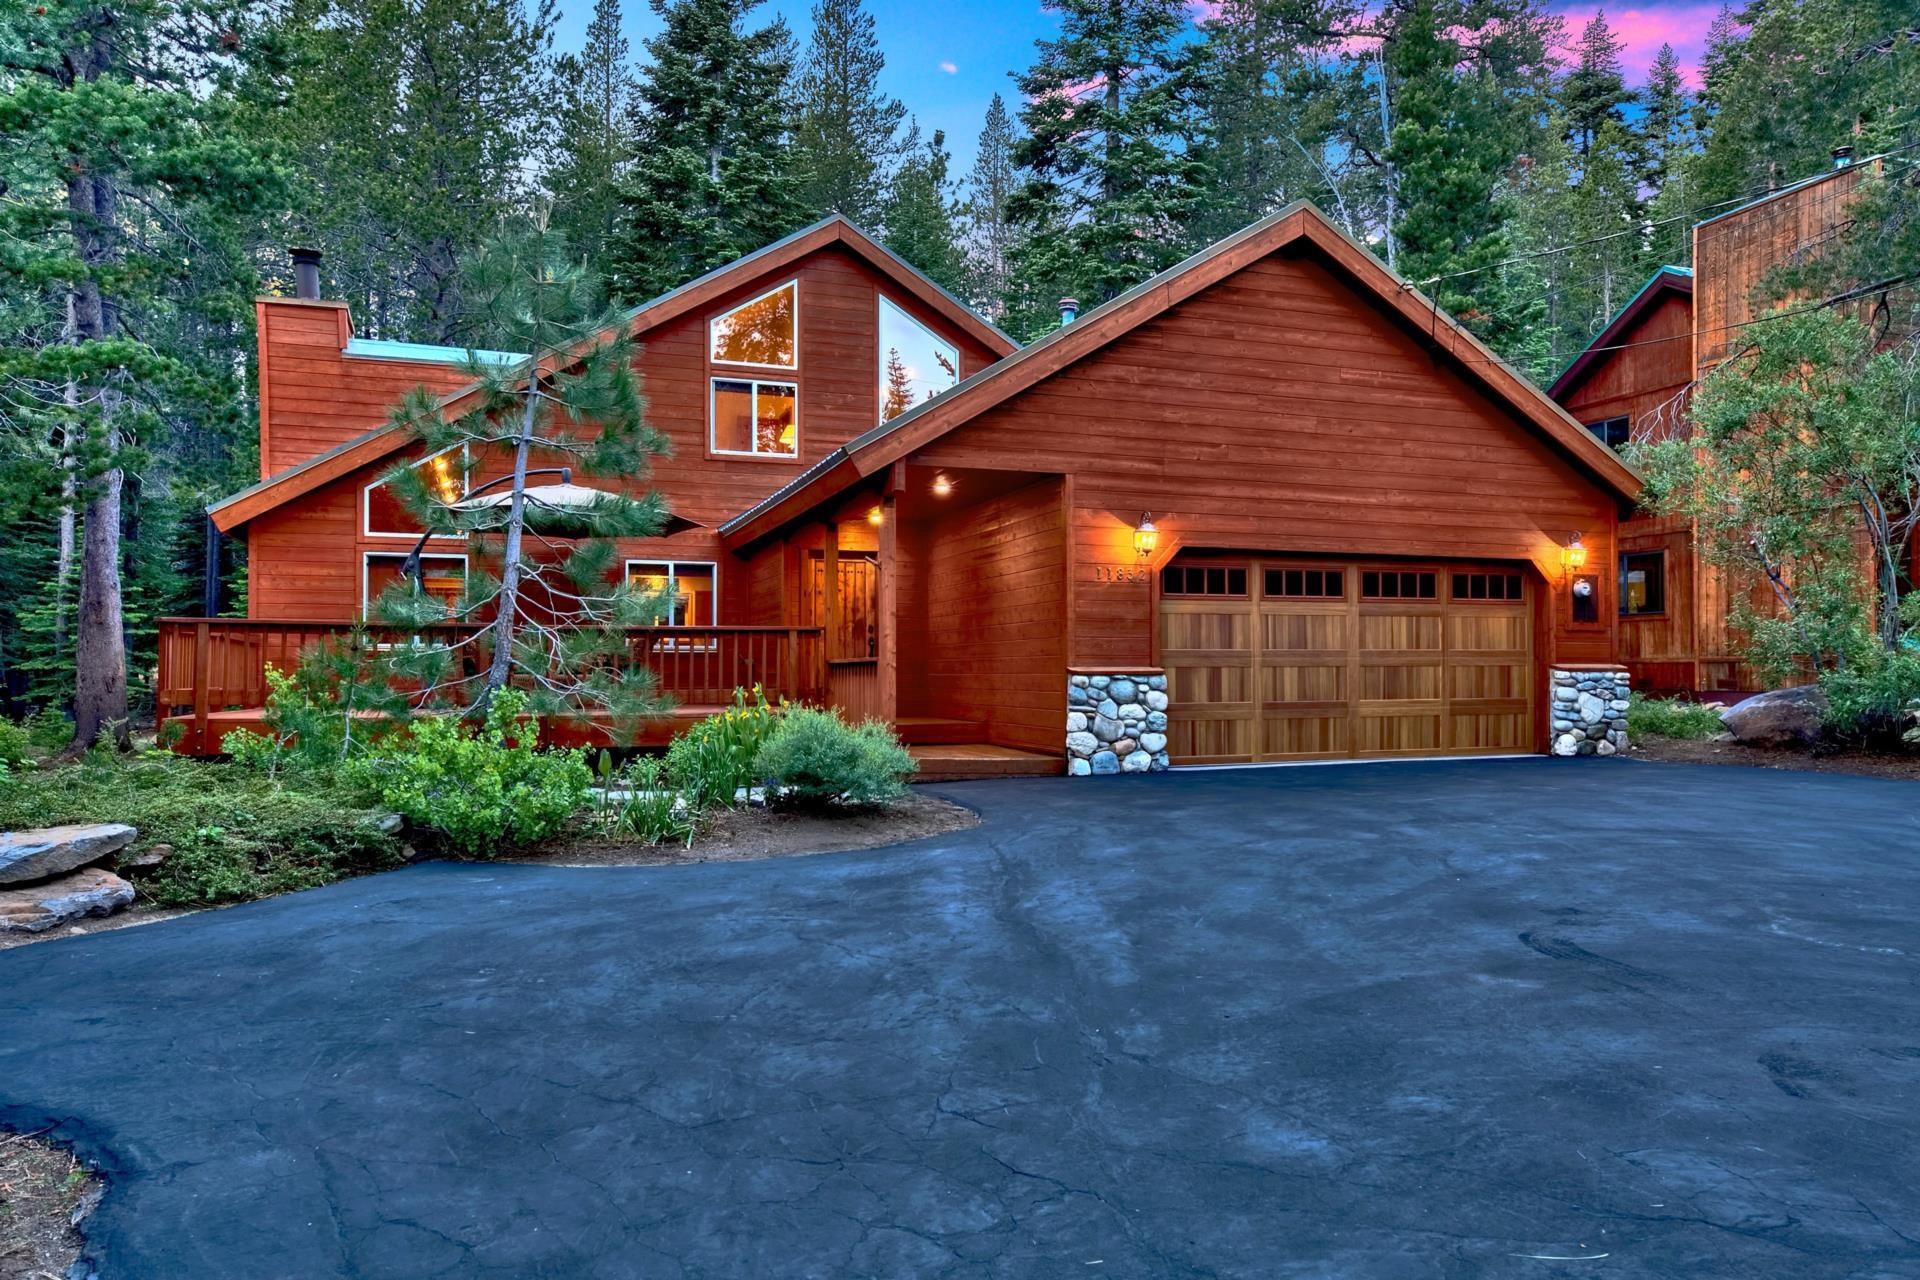 Image for 11832 Chateau Way, Truckee, CA 96161-6764